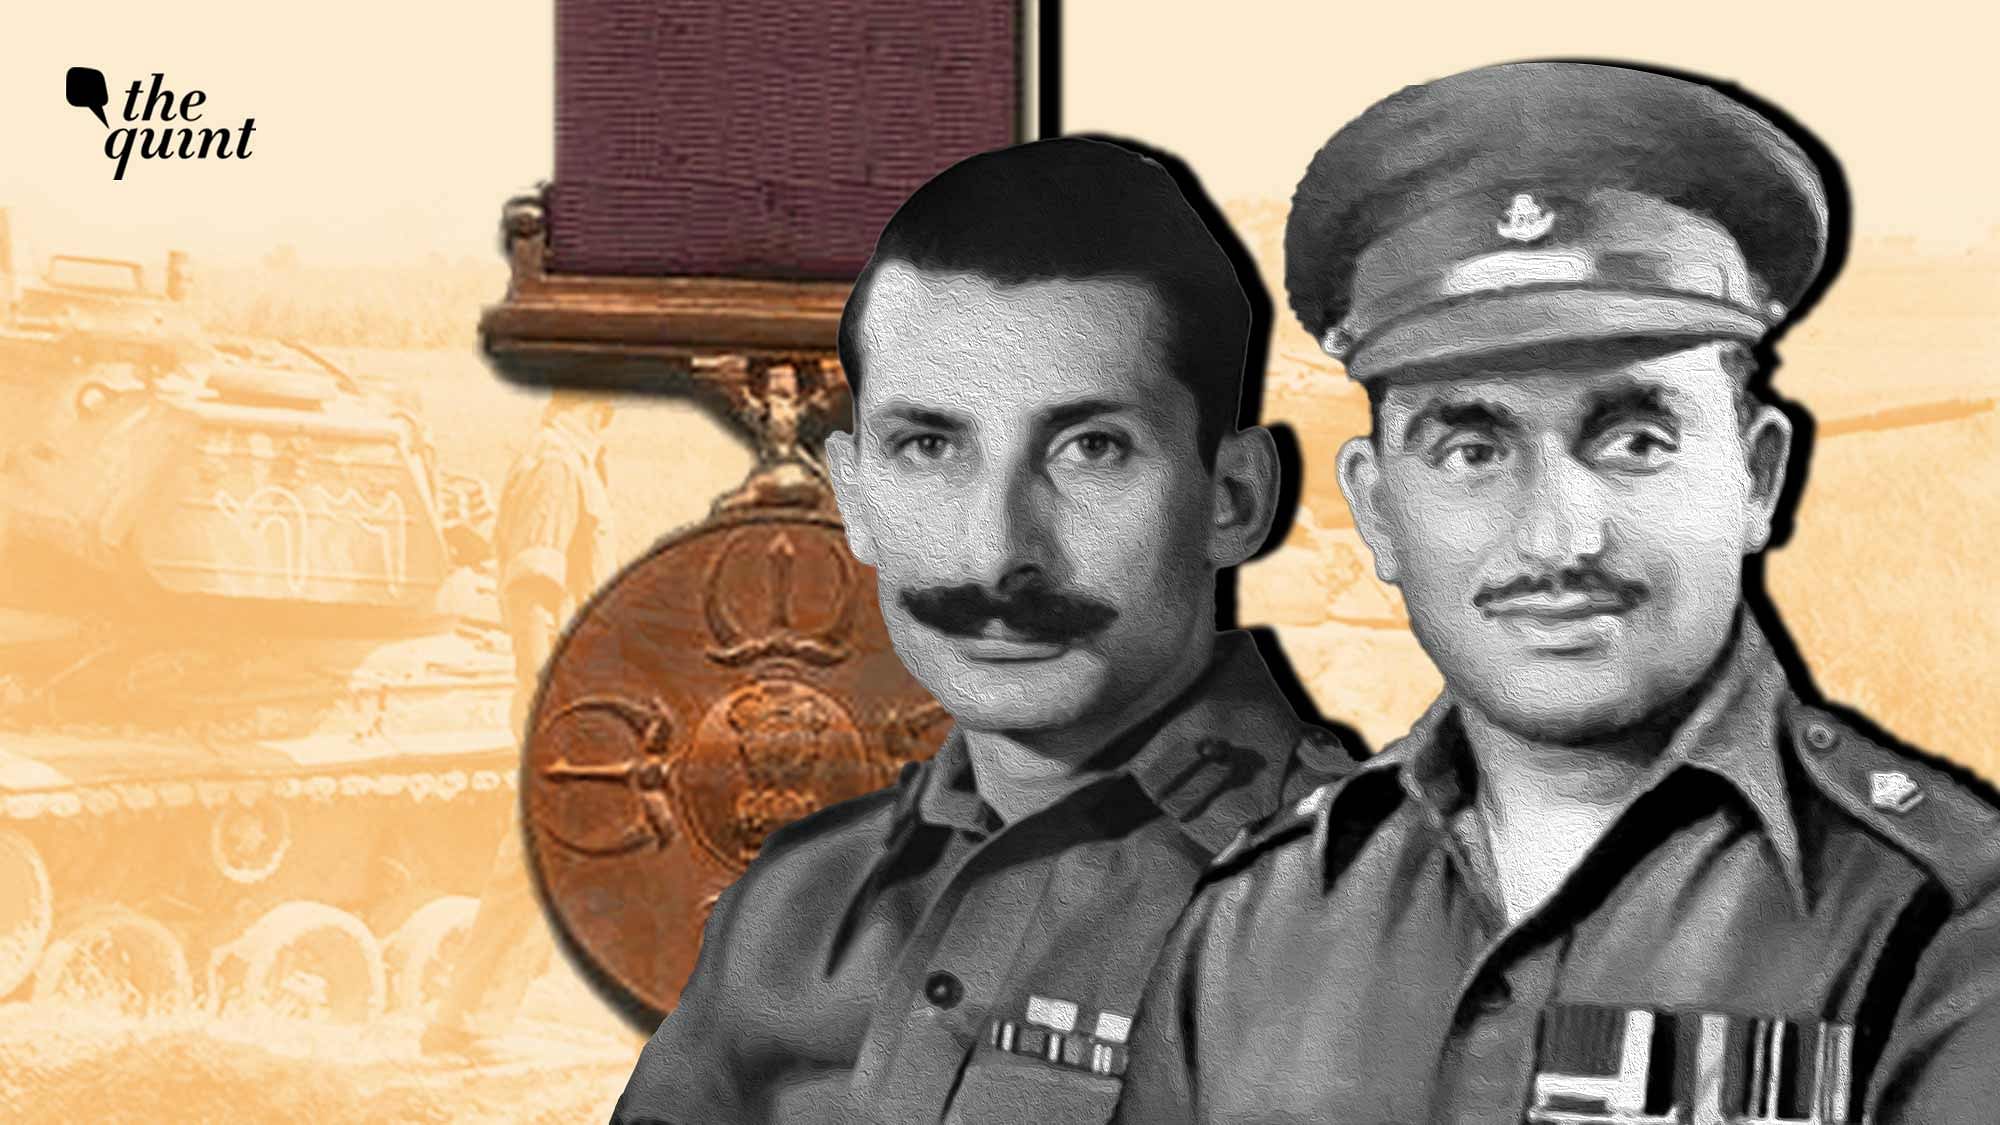 <div class="paragraphs"><p>If Srinagar is still part of India, the nation owes its gratitude to thousands of bravehearts like Major Sharma and Brigadier Singh who frustrated and foiled attempts by the newly formed military of Pakistan to invade and capture Jammu &amp; Kashmir and make it a part of Pakistan. The fearful fact is that Pakistan almost succeeded in that first war with India.</p></div>